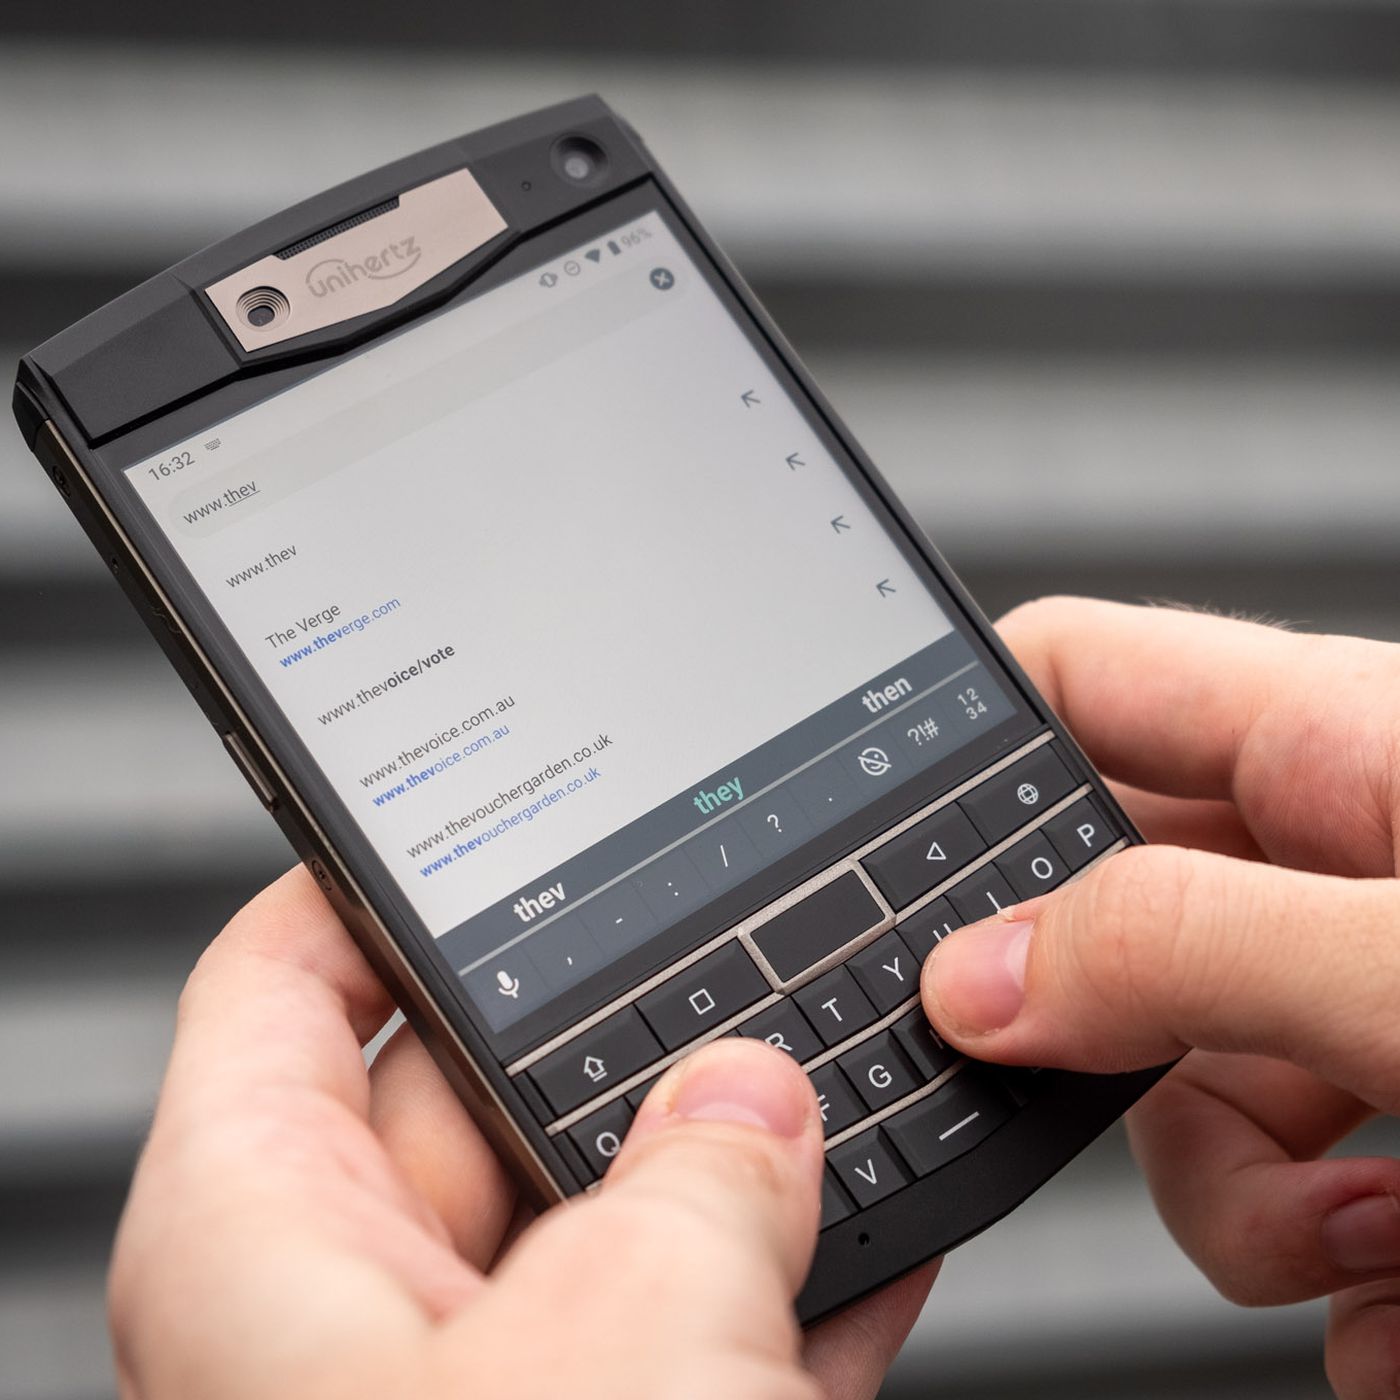 This Heavy Duty Phone Is Like A Blackberry Passport That Runs